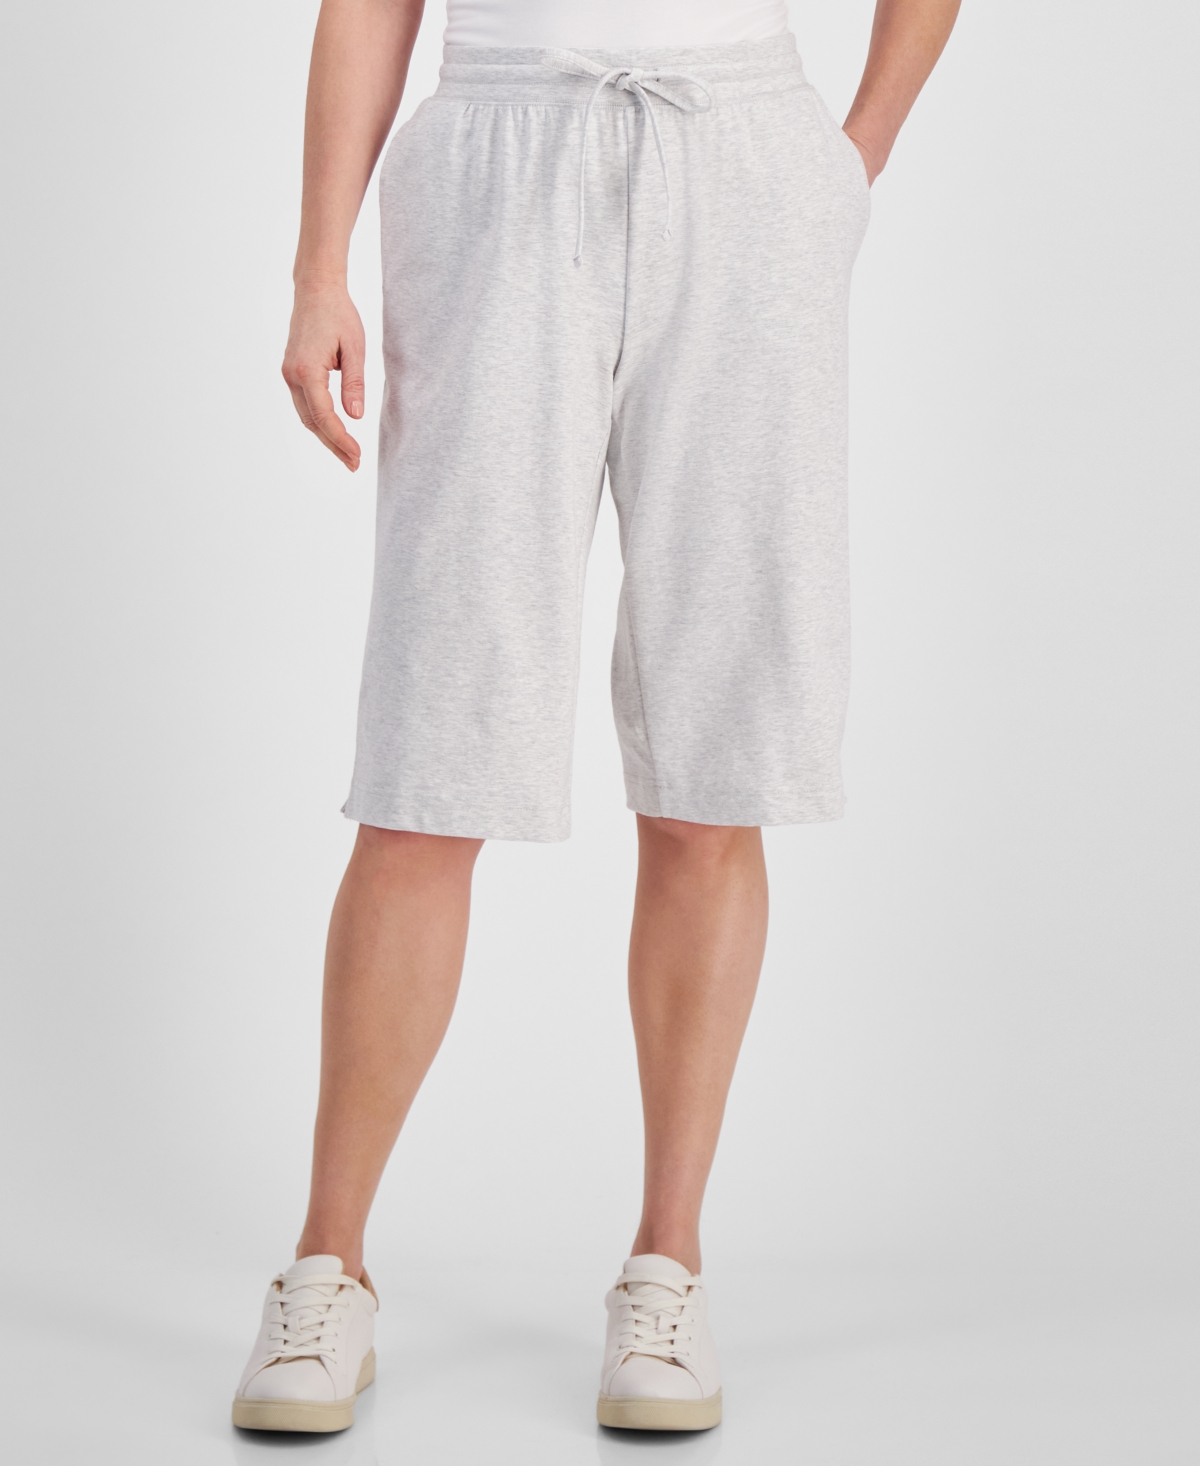 STYLE & CO WOMEN'S MID RISE SWEATPANT BERMUDA SHORTS, CREATED FOR MACY'S